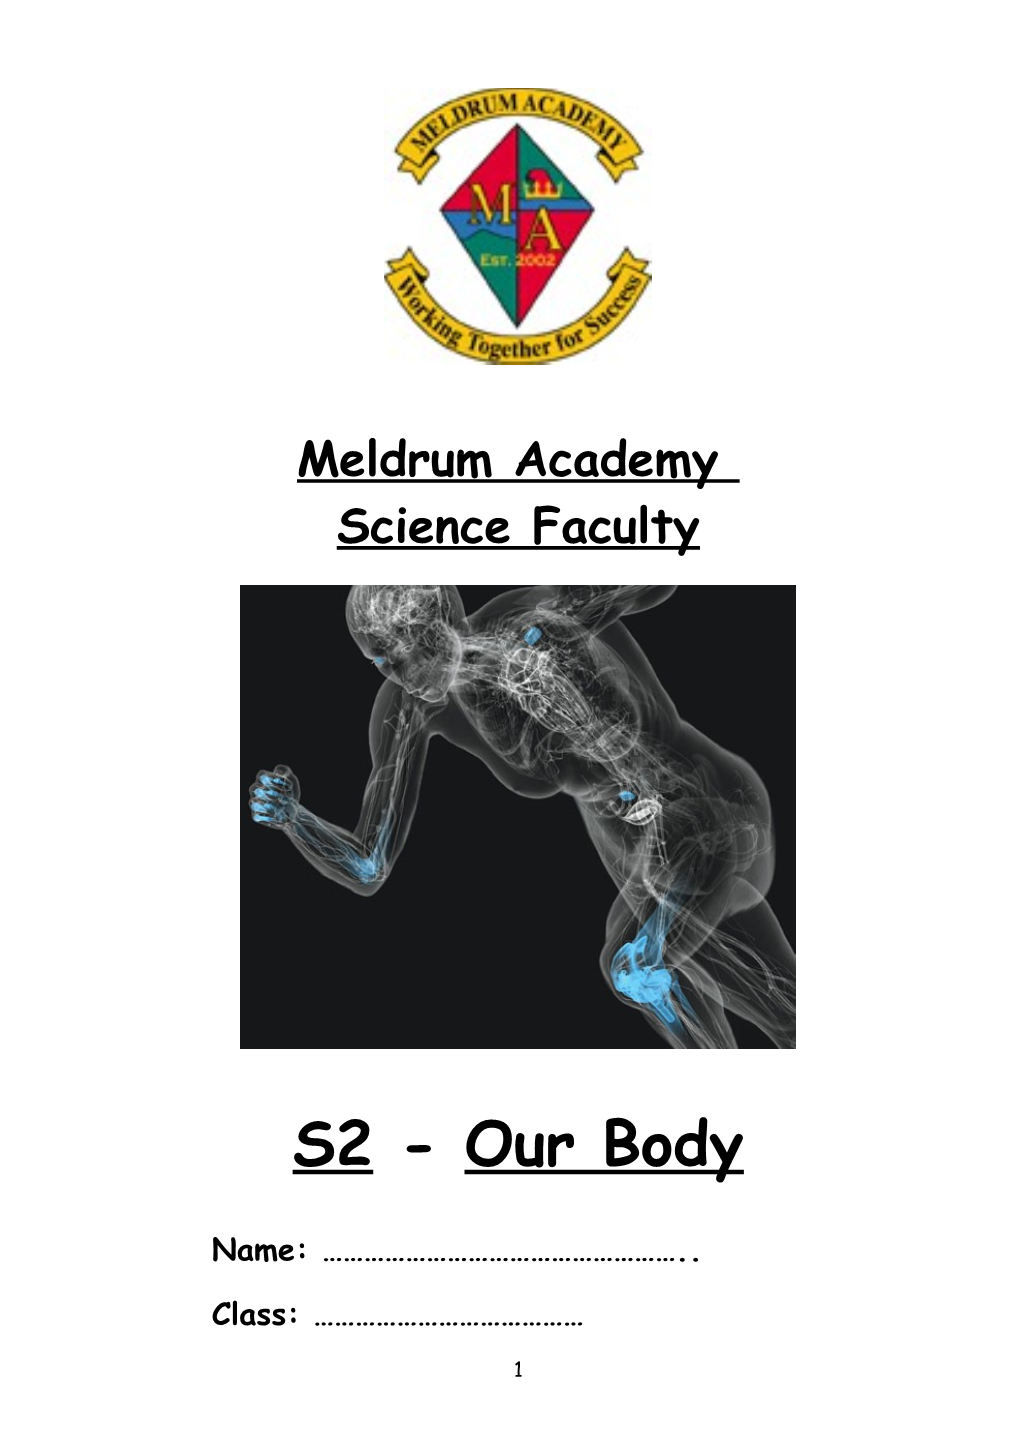 Meldrum Academy Science Faculty